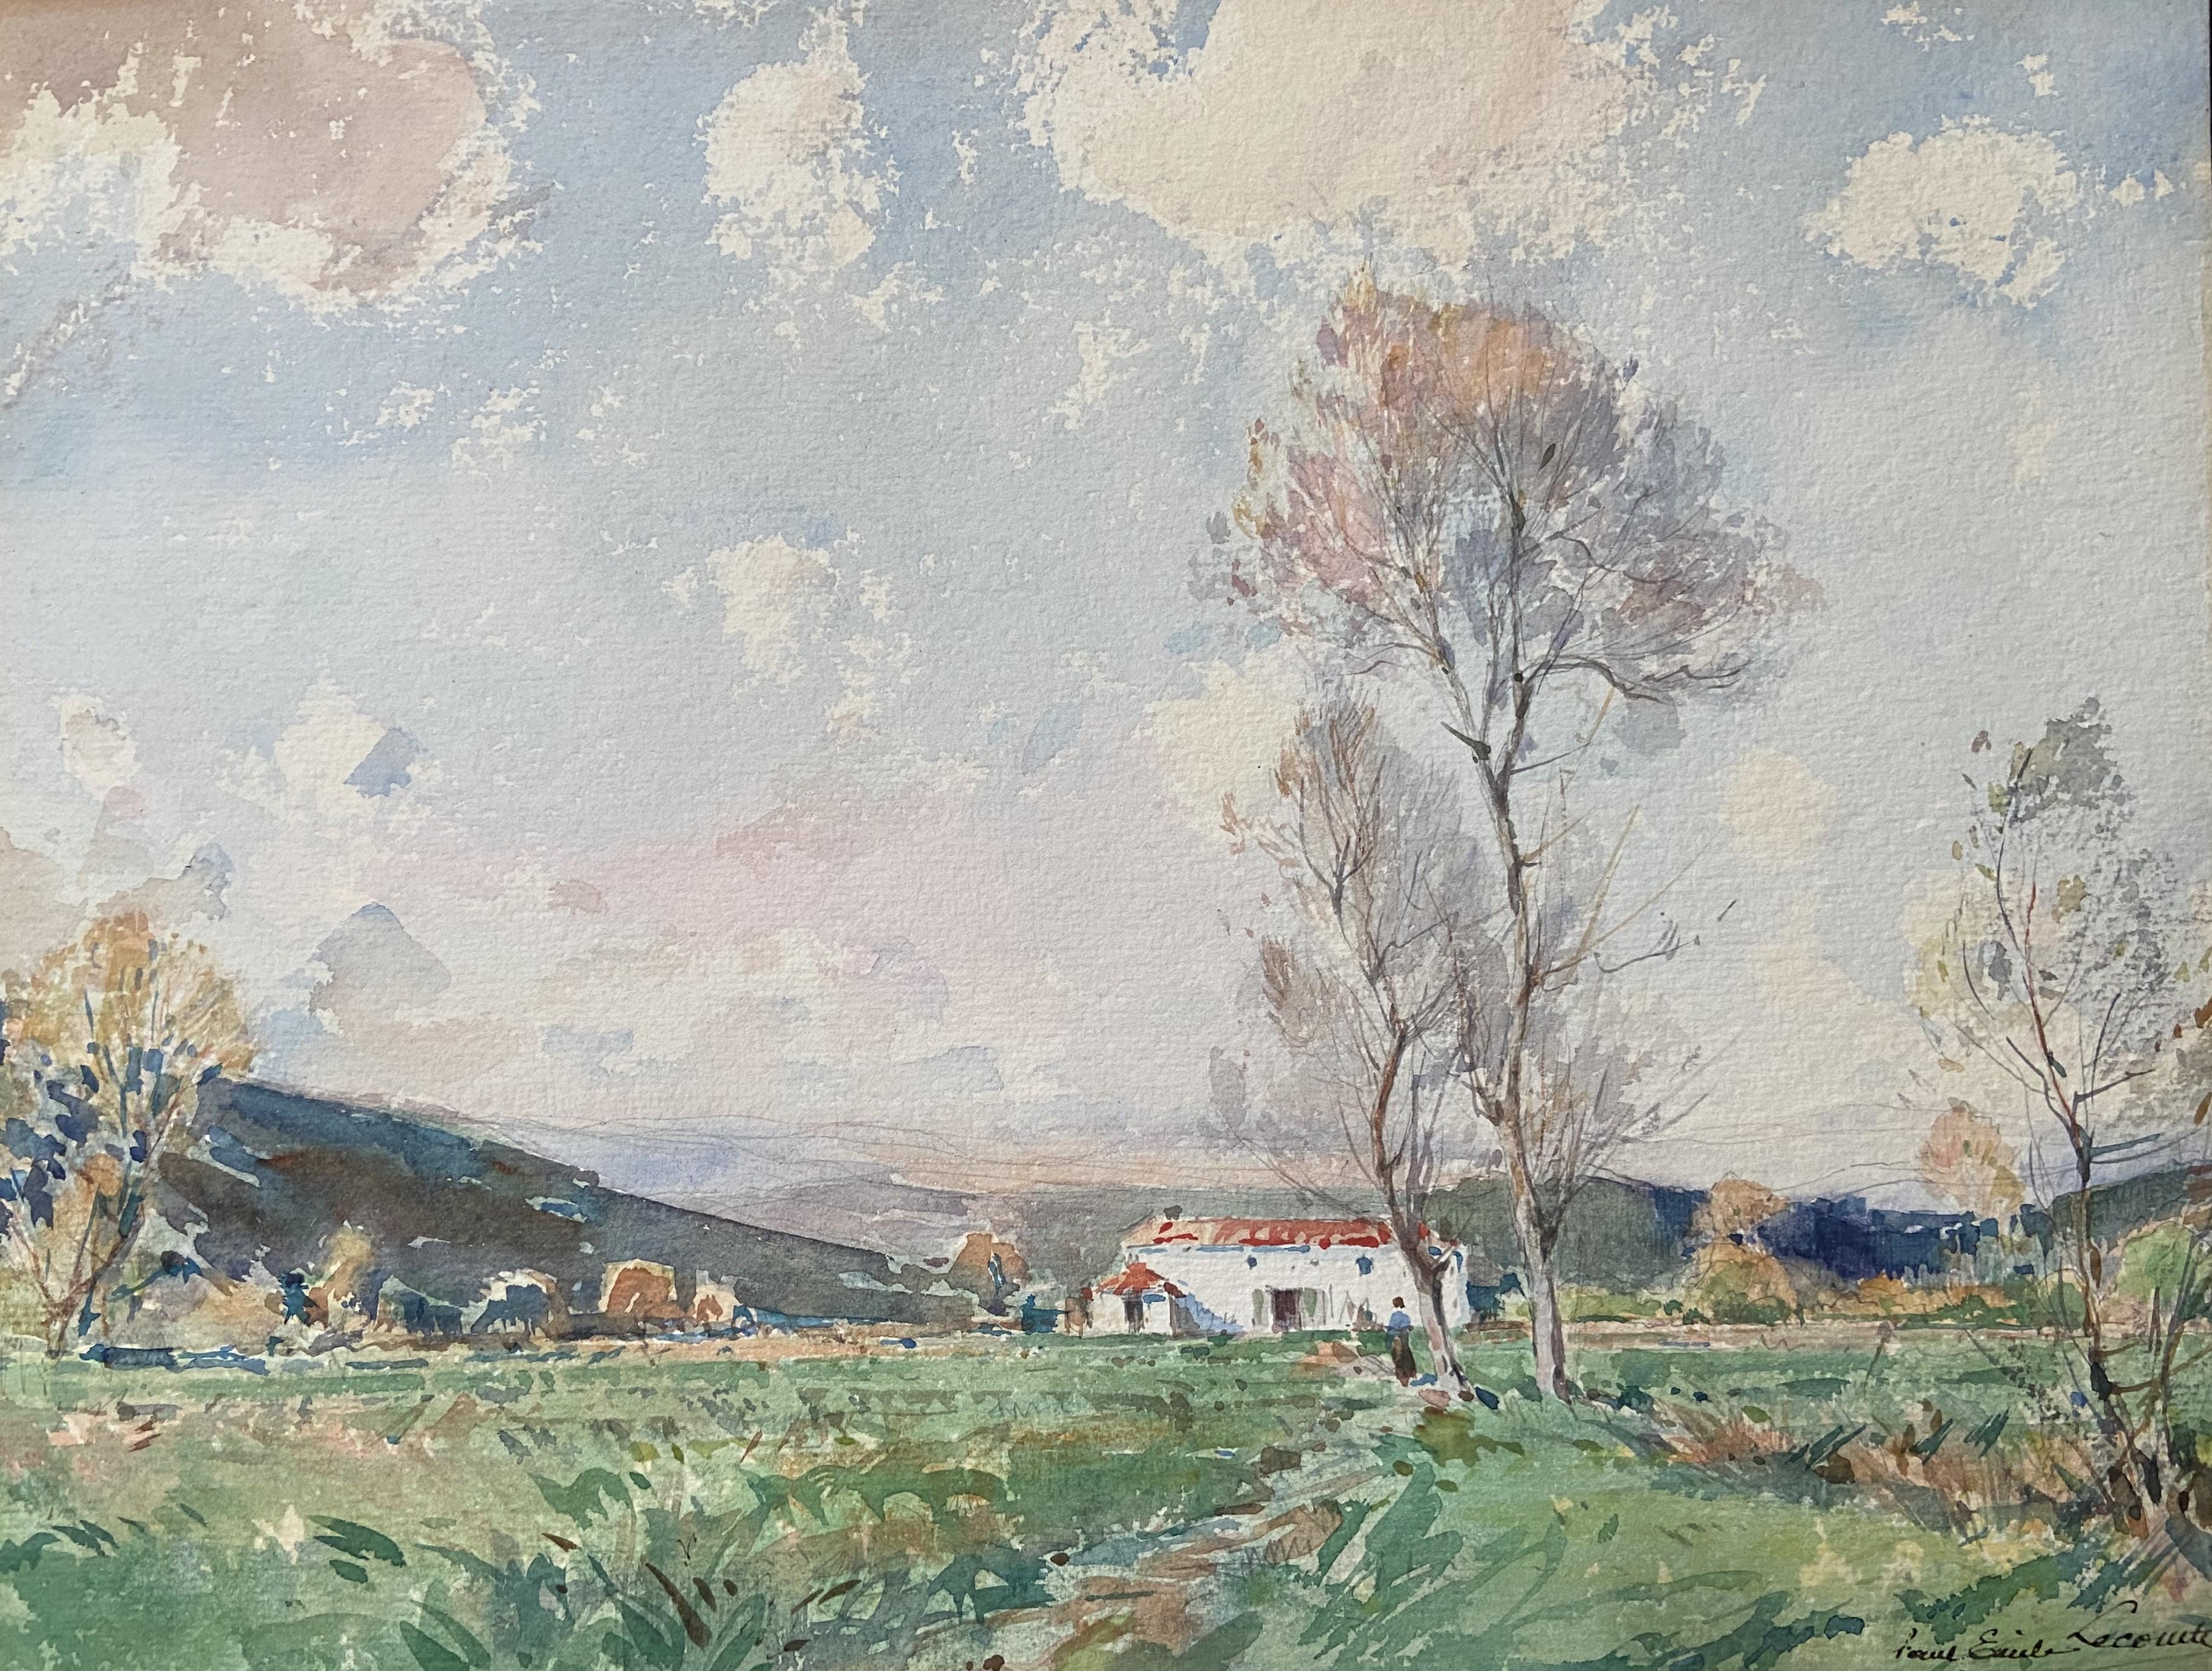 Paul-Emile lecomte (1877-1950)
Landscape of a valley between Cannes and Grasse (South of France)
Signed lower right
watercolor on paper
25.8 x 33.9 cm
in a vintage frame : 33 x 41.4 cm
Titled and situated on the back of the framing, label of the